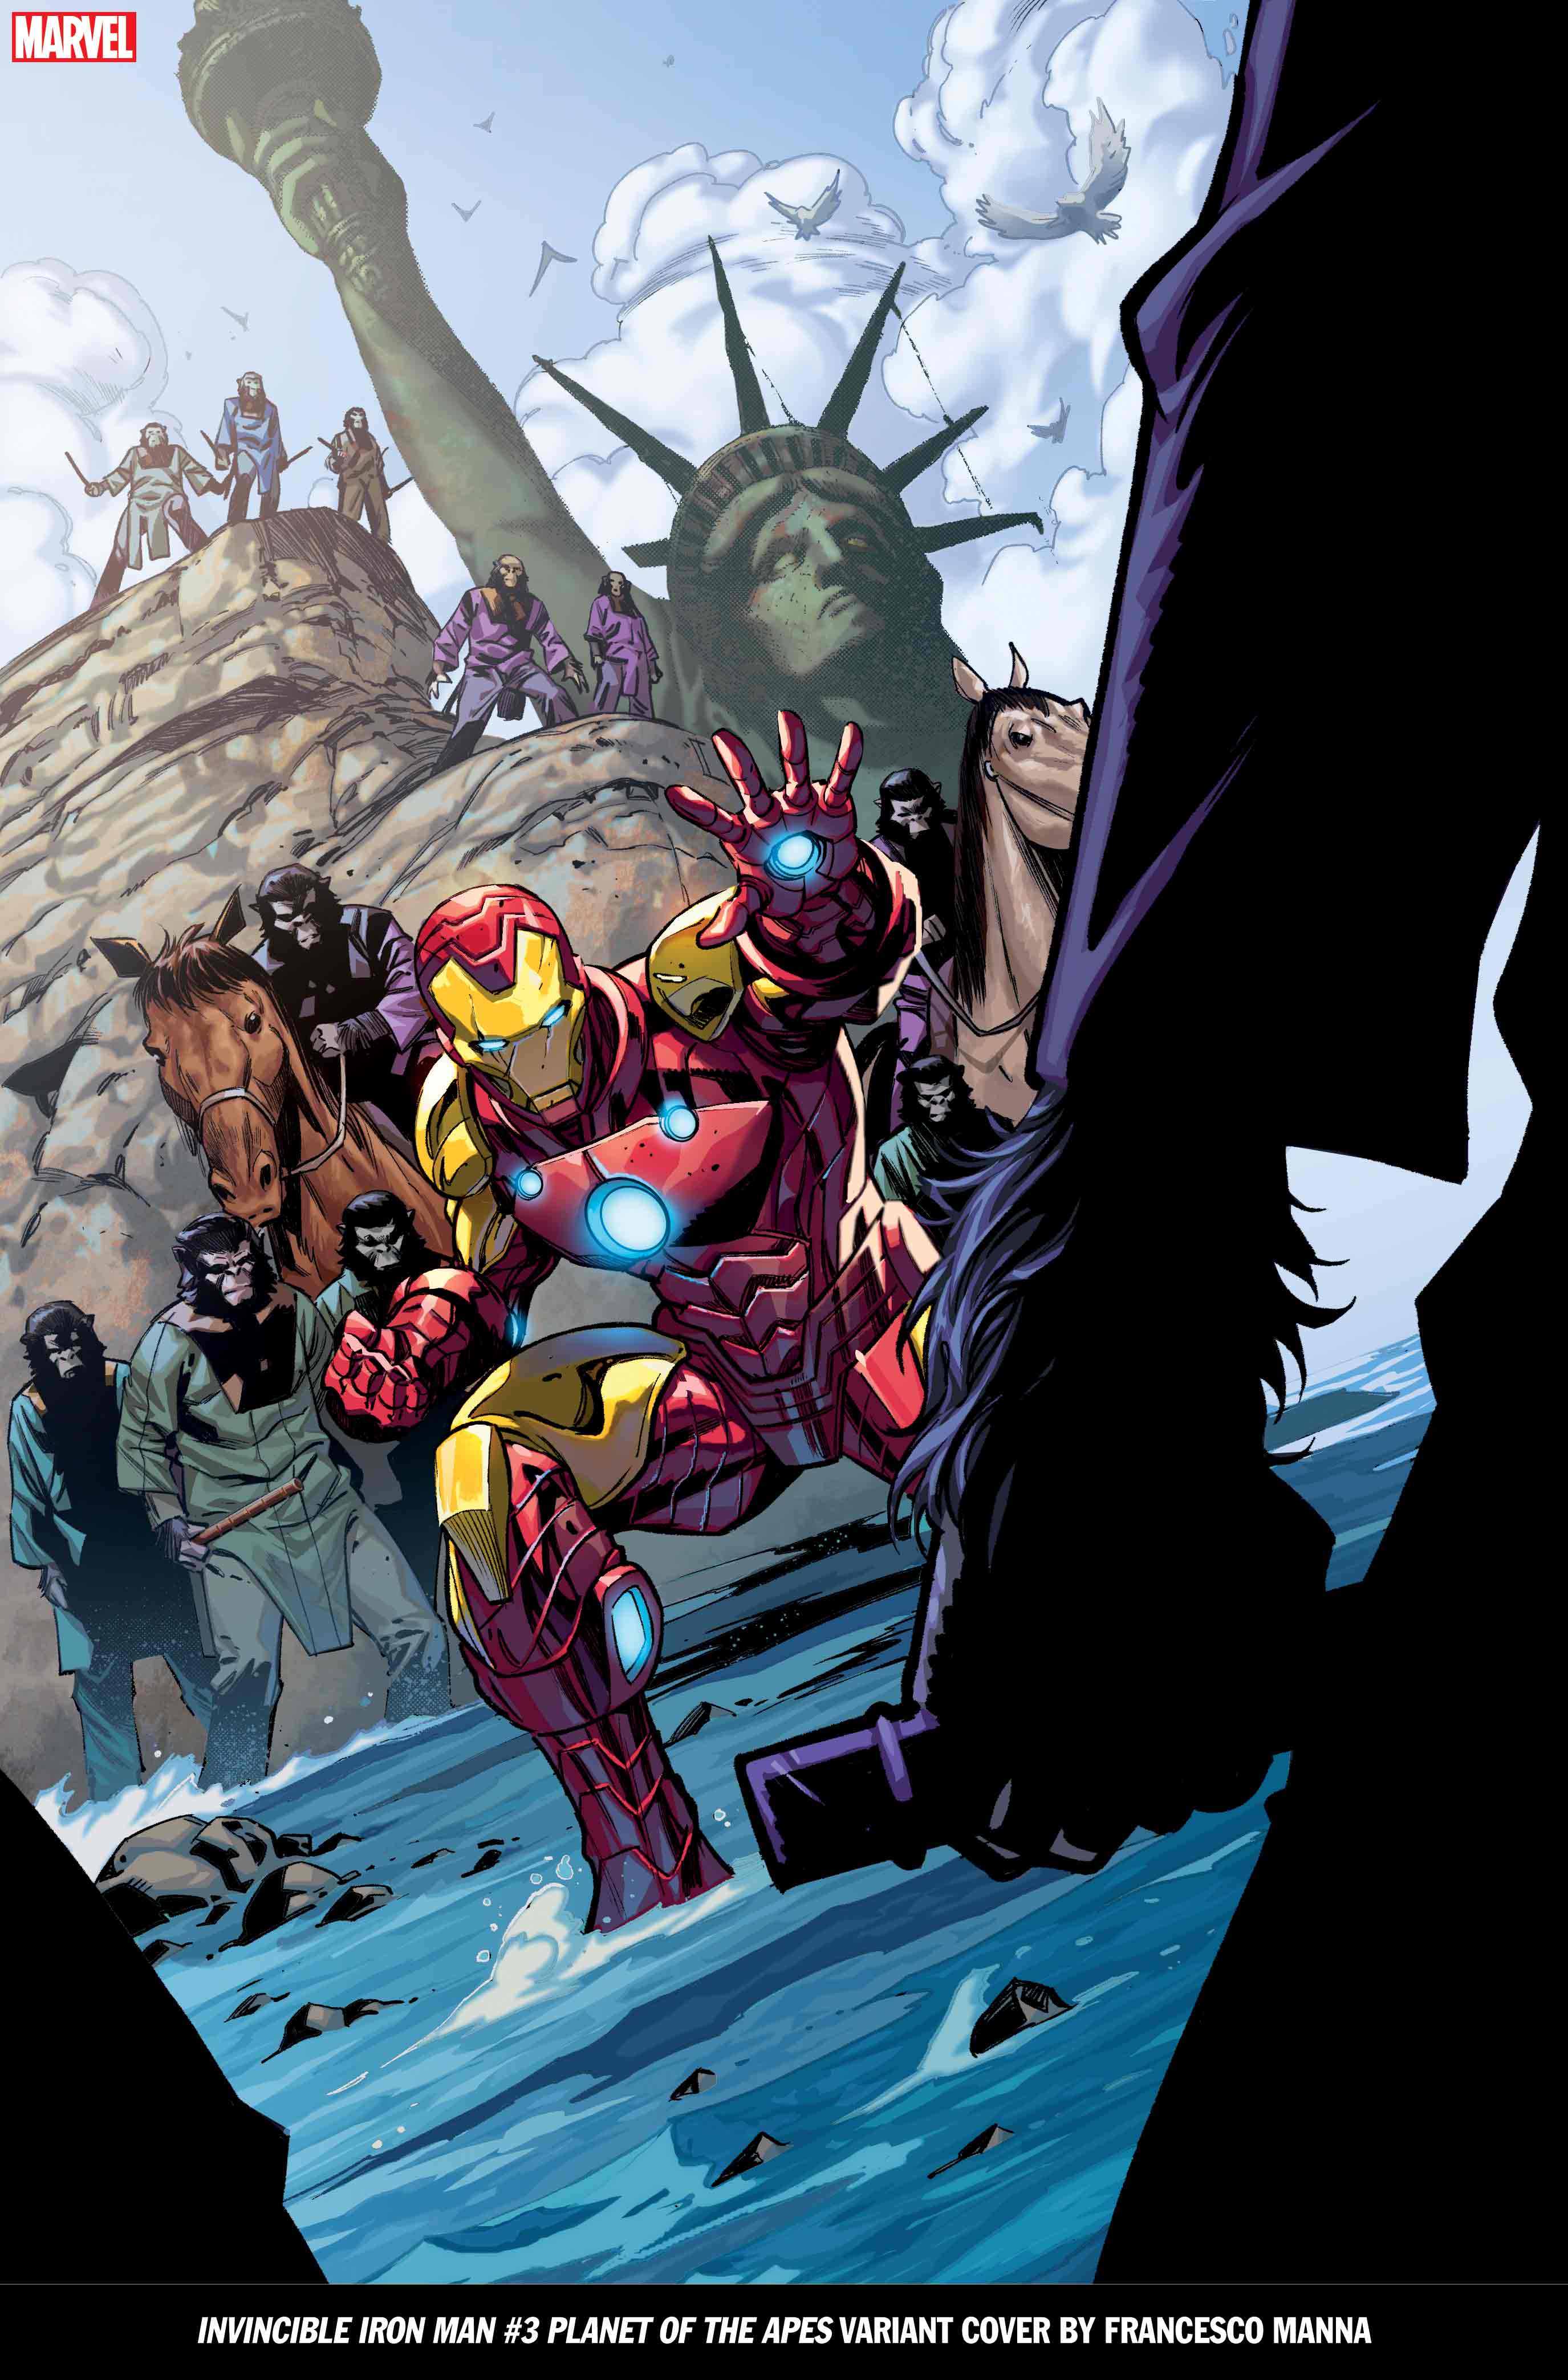 Invincible Iron Man Planet of the Apes cover